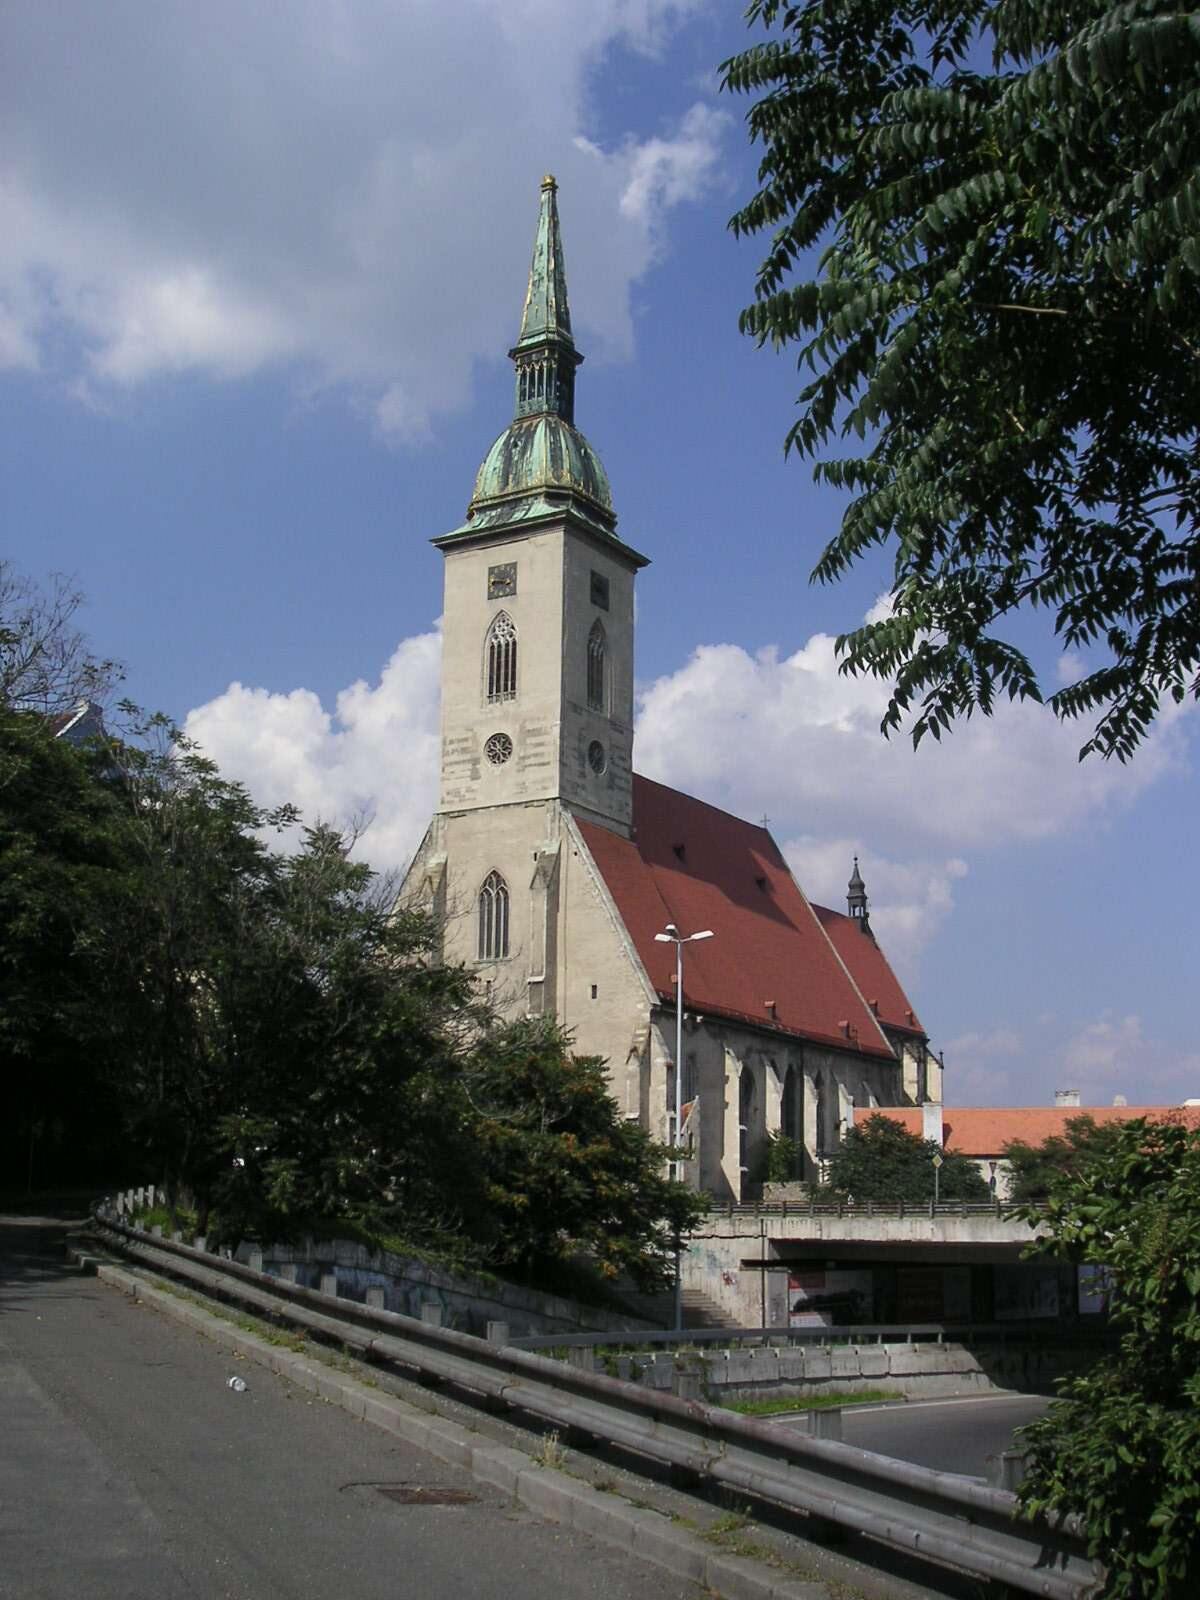 The St. Martin's cathedral in Bratislava, Slovakia